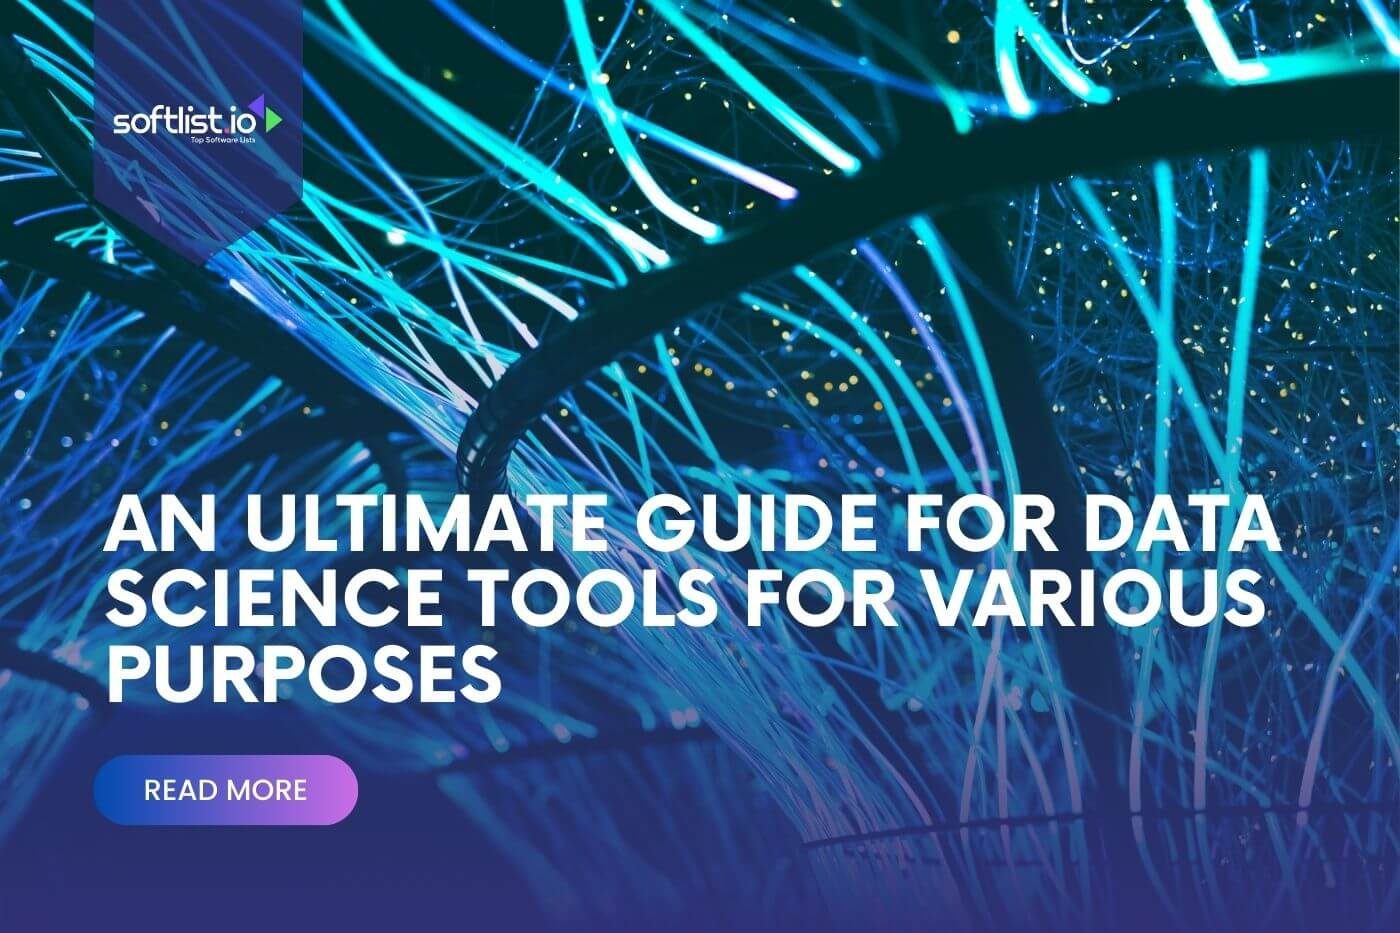 An Ultimate Guide for Data Science Tools for Various Purposes